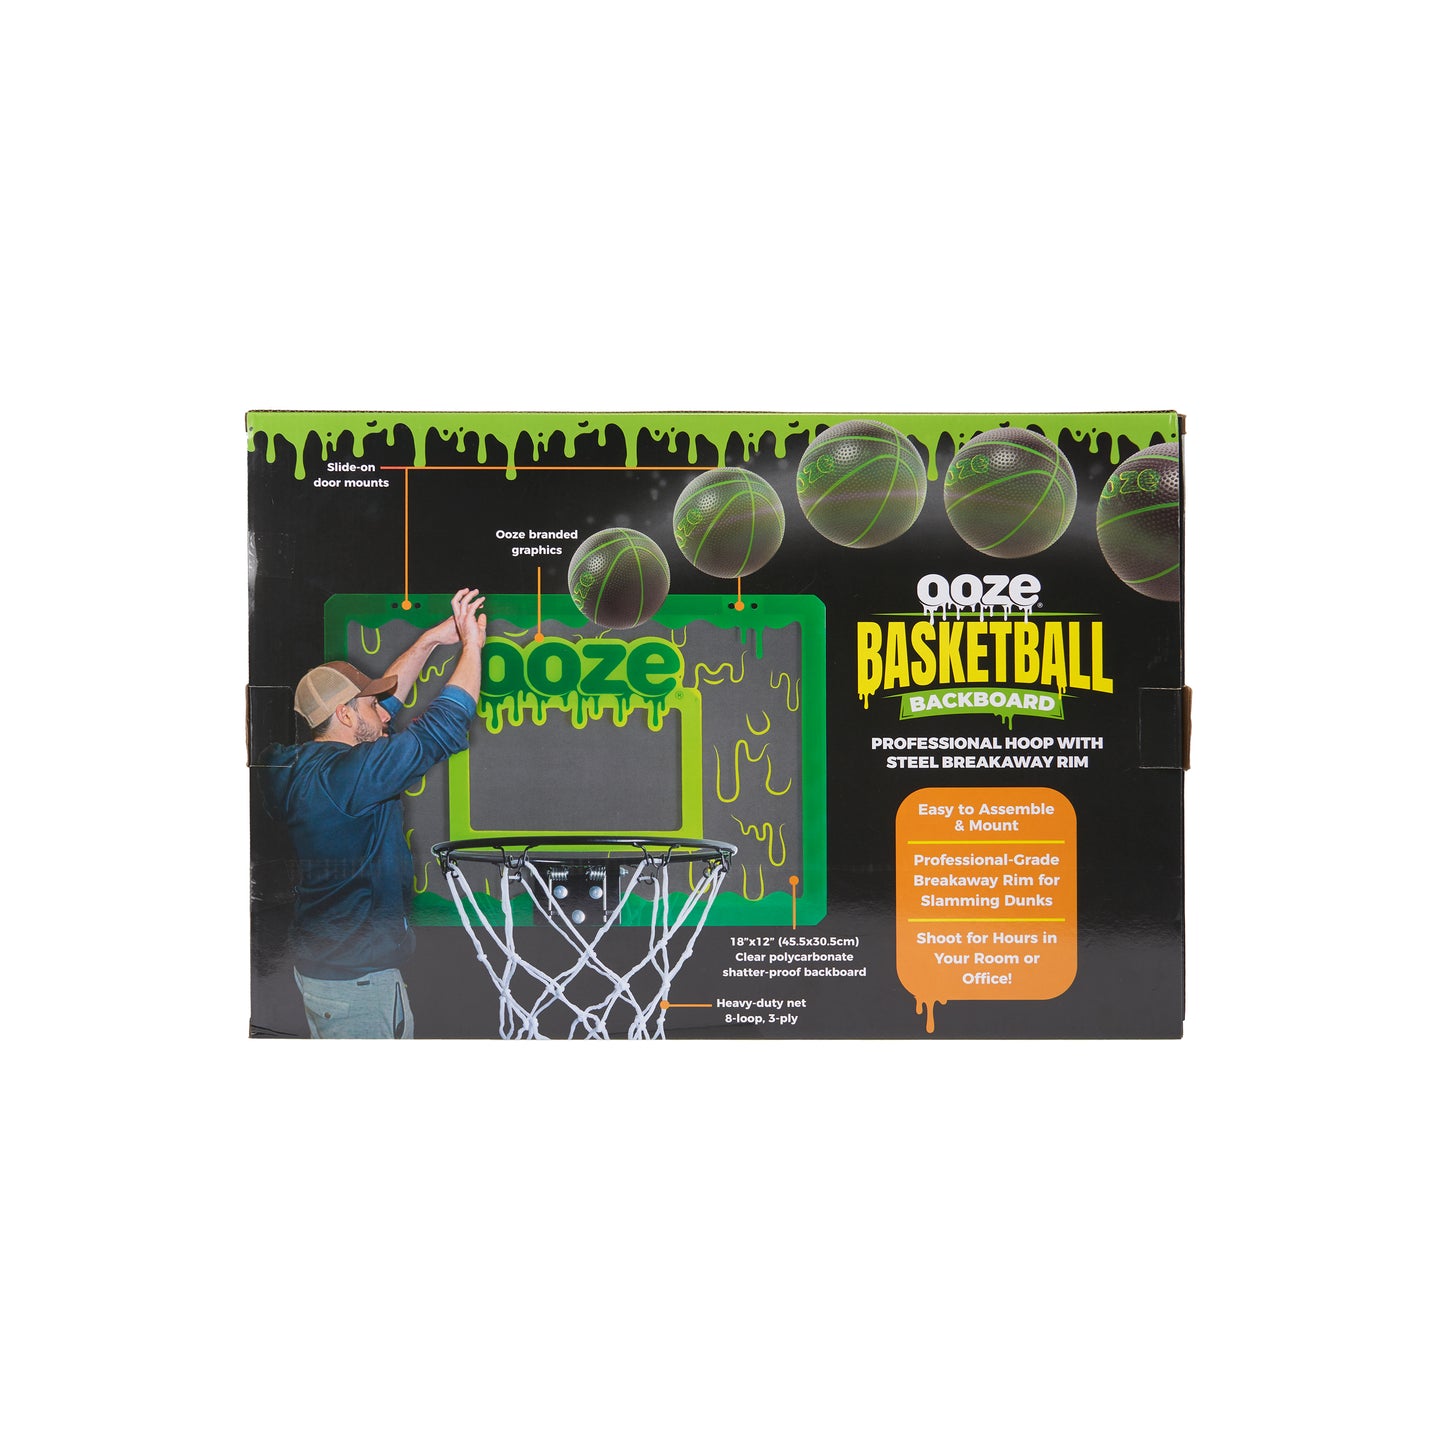 The back of the box for the Ooze Mini Basketball Hoop Set